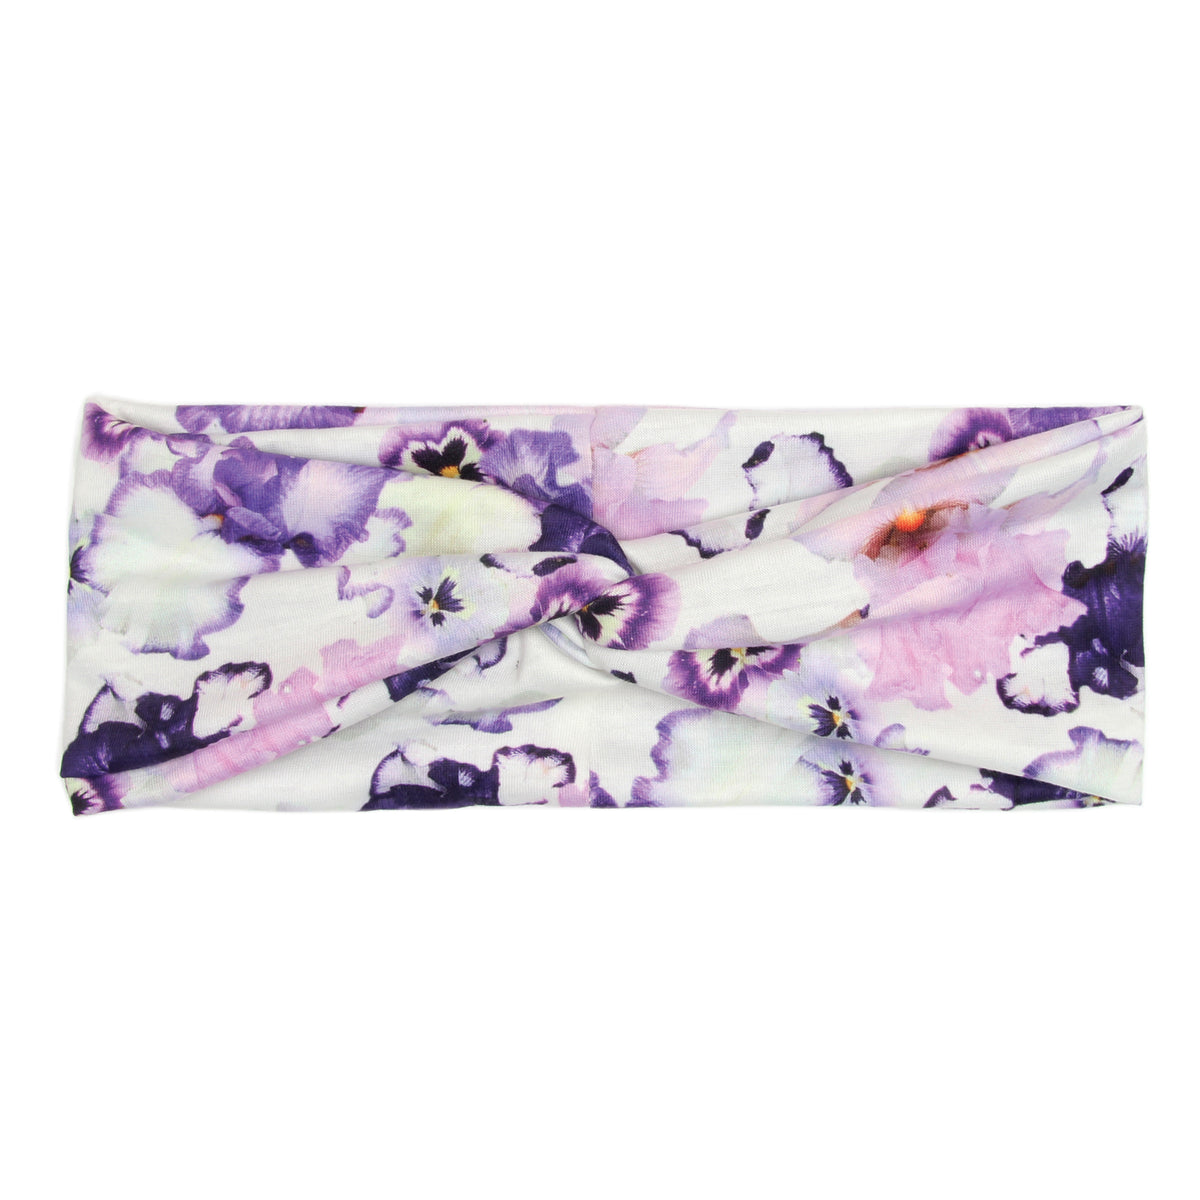 BANDED Women’s Headwraps + Hair Accessories - Giverny Pansy - Classic Twist Headwrap